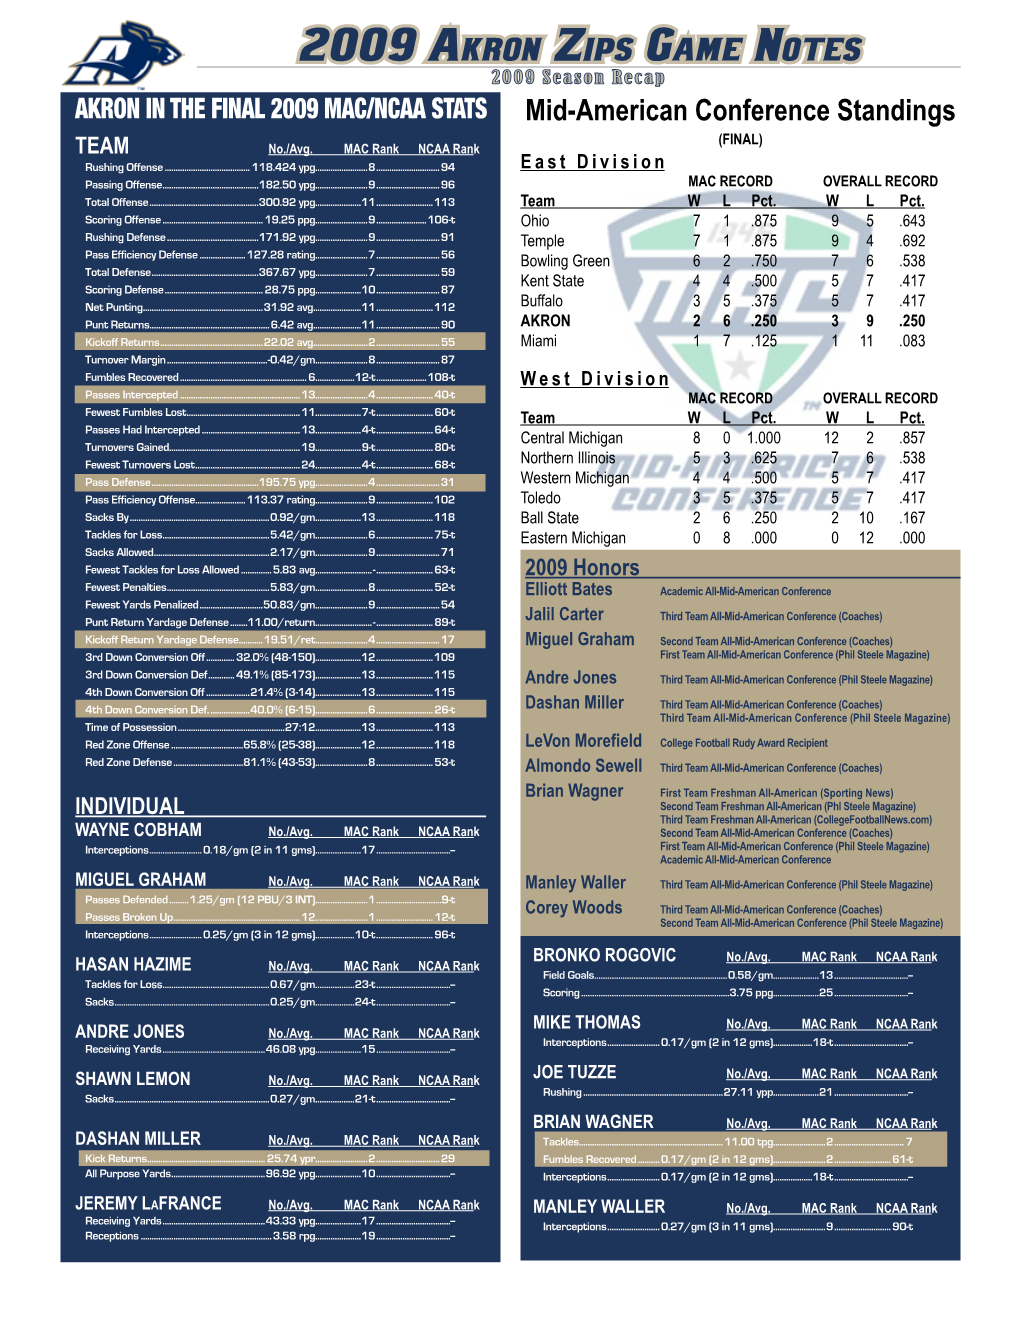 2009 Akron Zips Game Notes 2009 Season Recap AKRON in the FINAL 2009 MAC/NCAA STATS Mid-American Conference Standings (FINAL) TEAM No./Avg